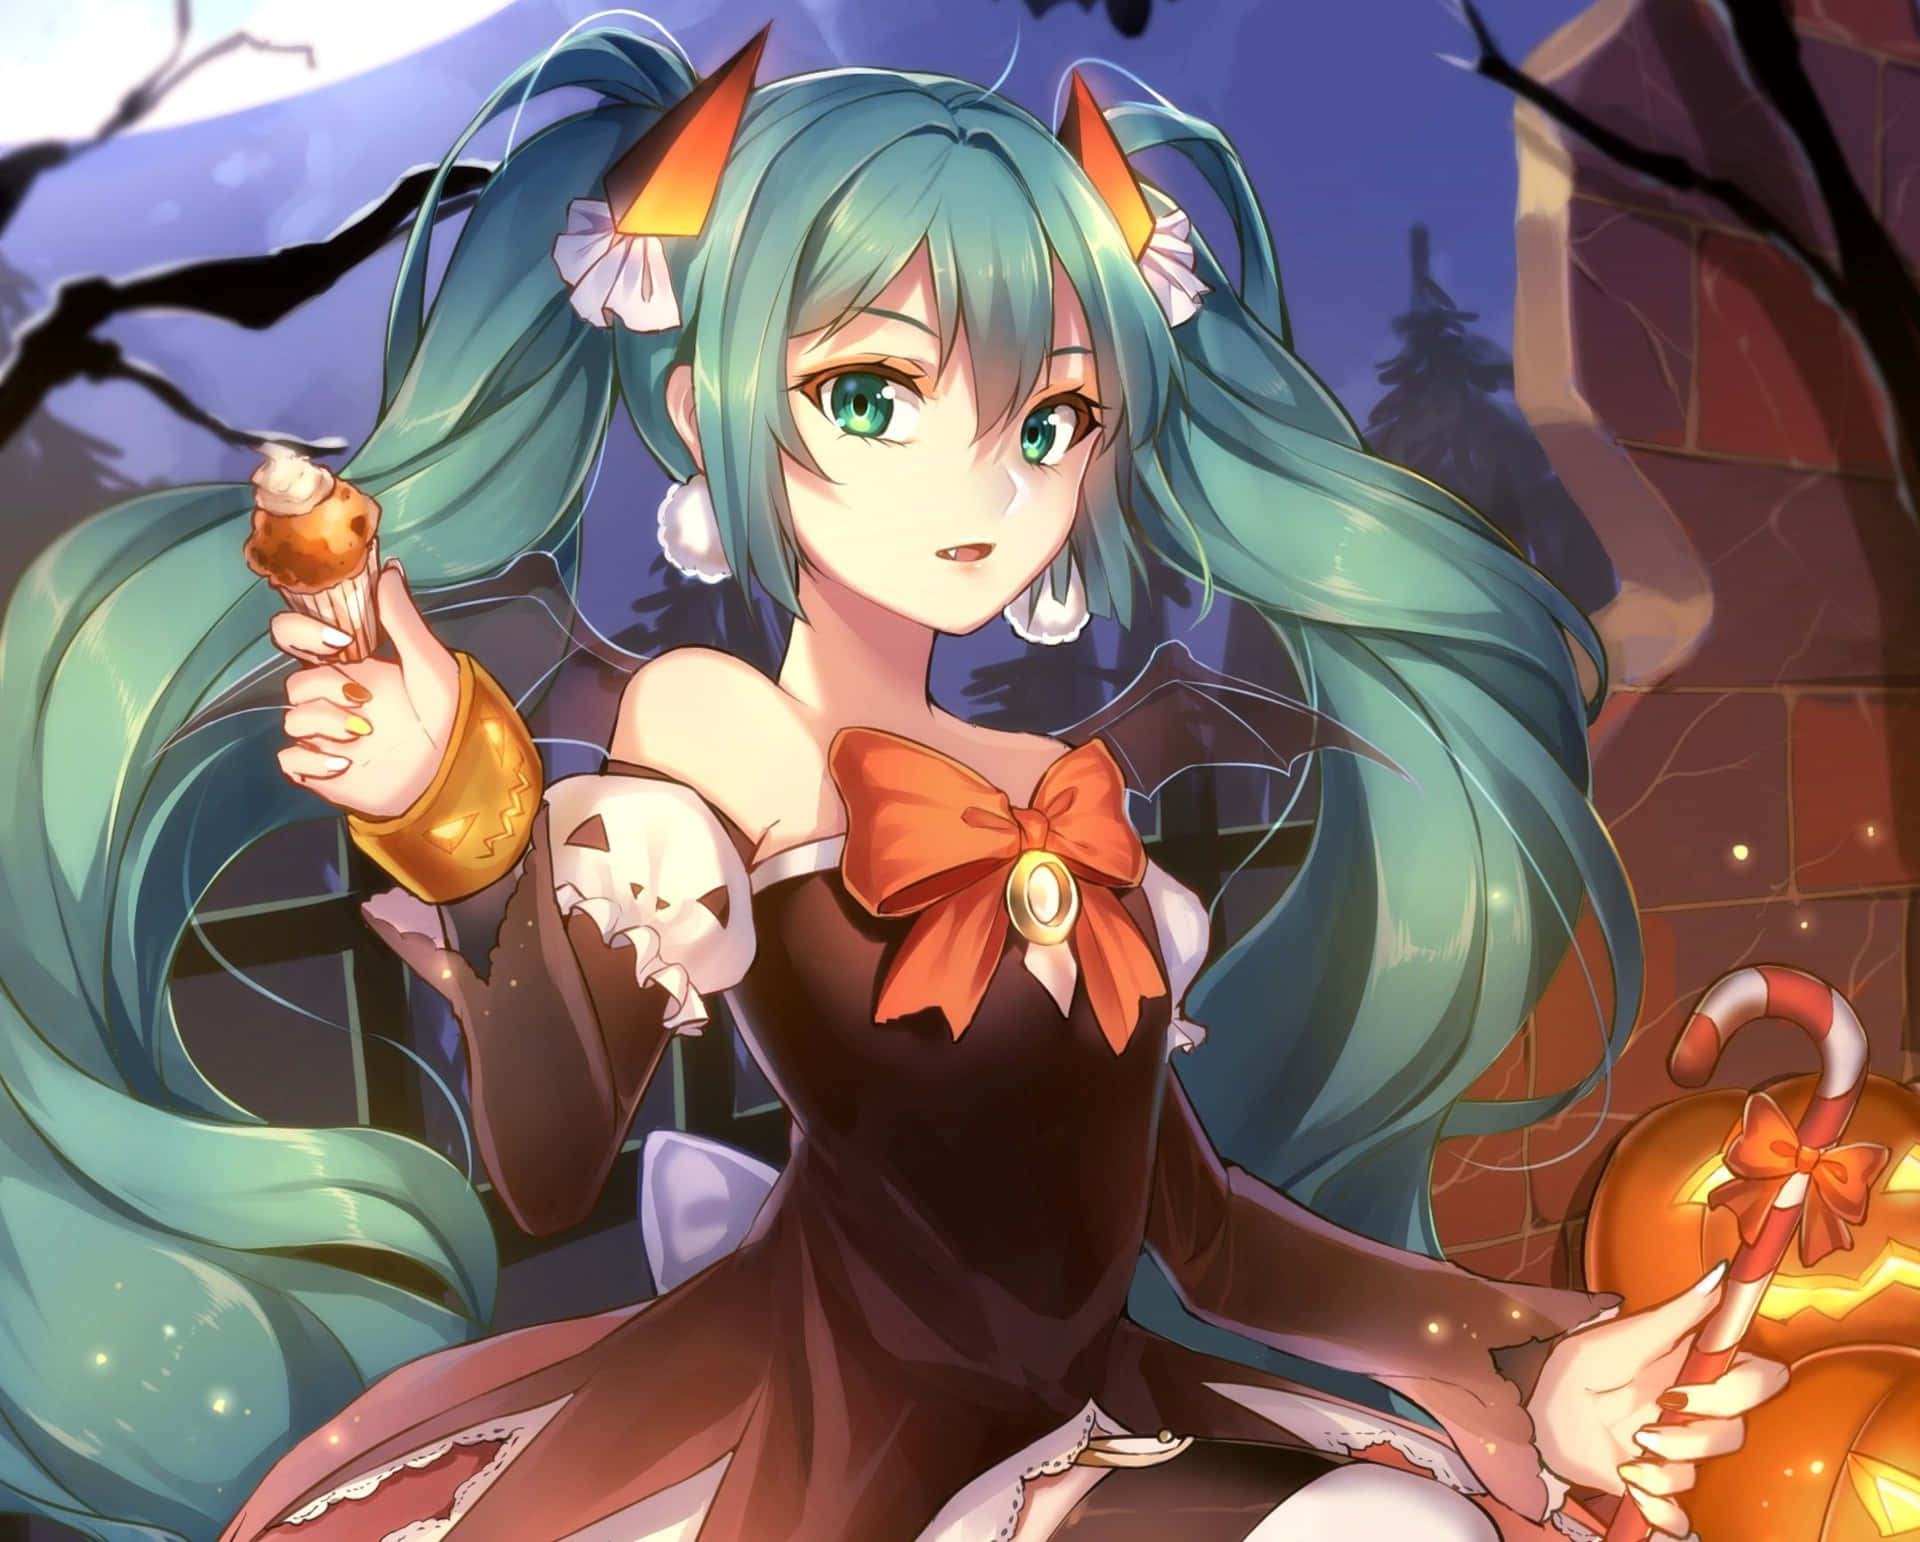 It's time to get spooky with this Halloween profile picture.